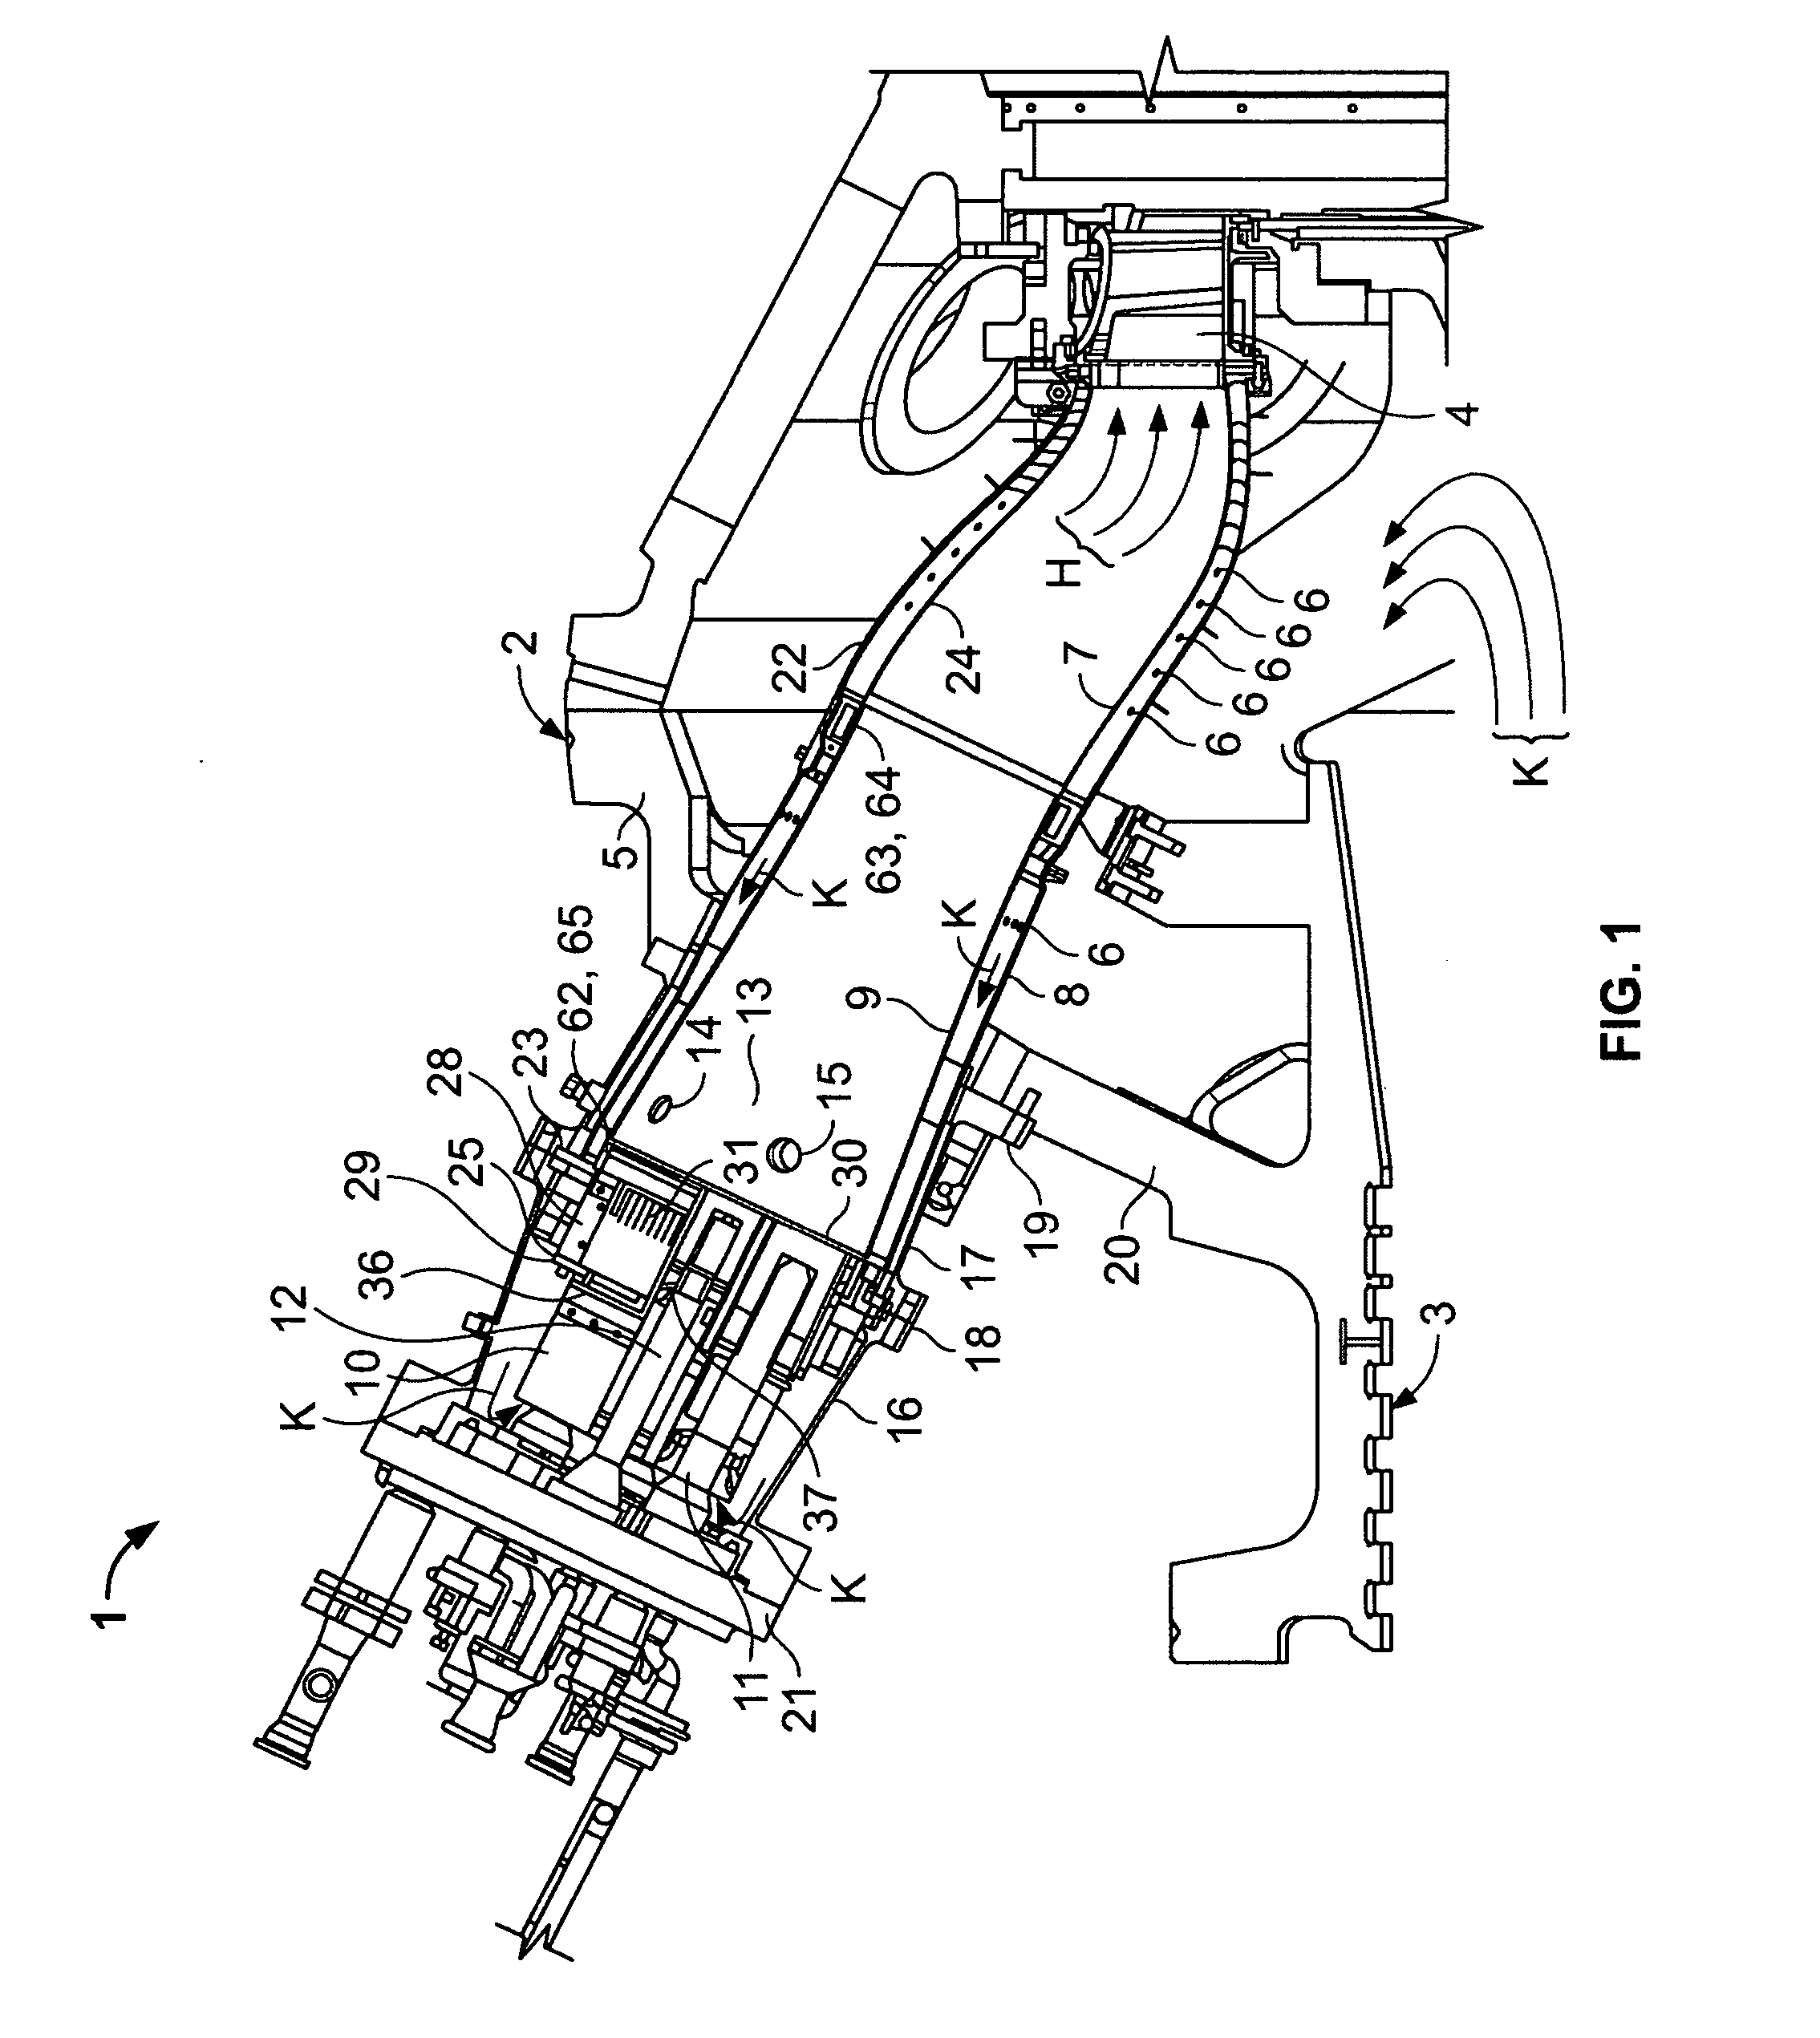 Methods and apparatus for low emission gas turbine energy generation